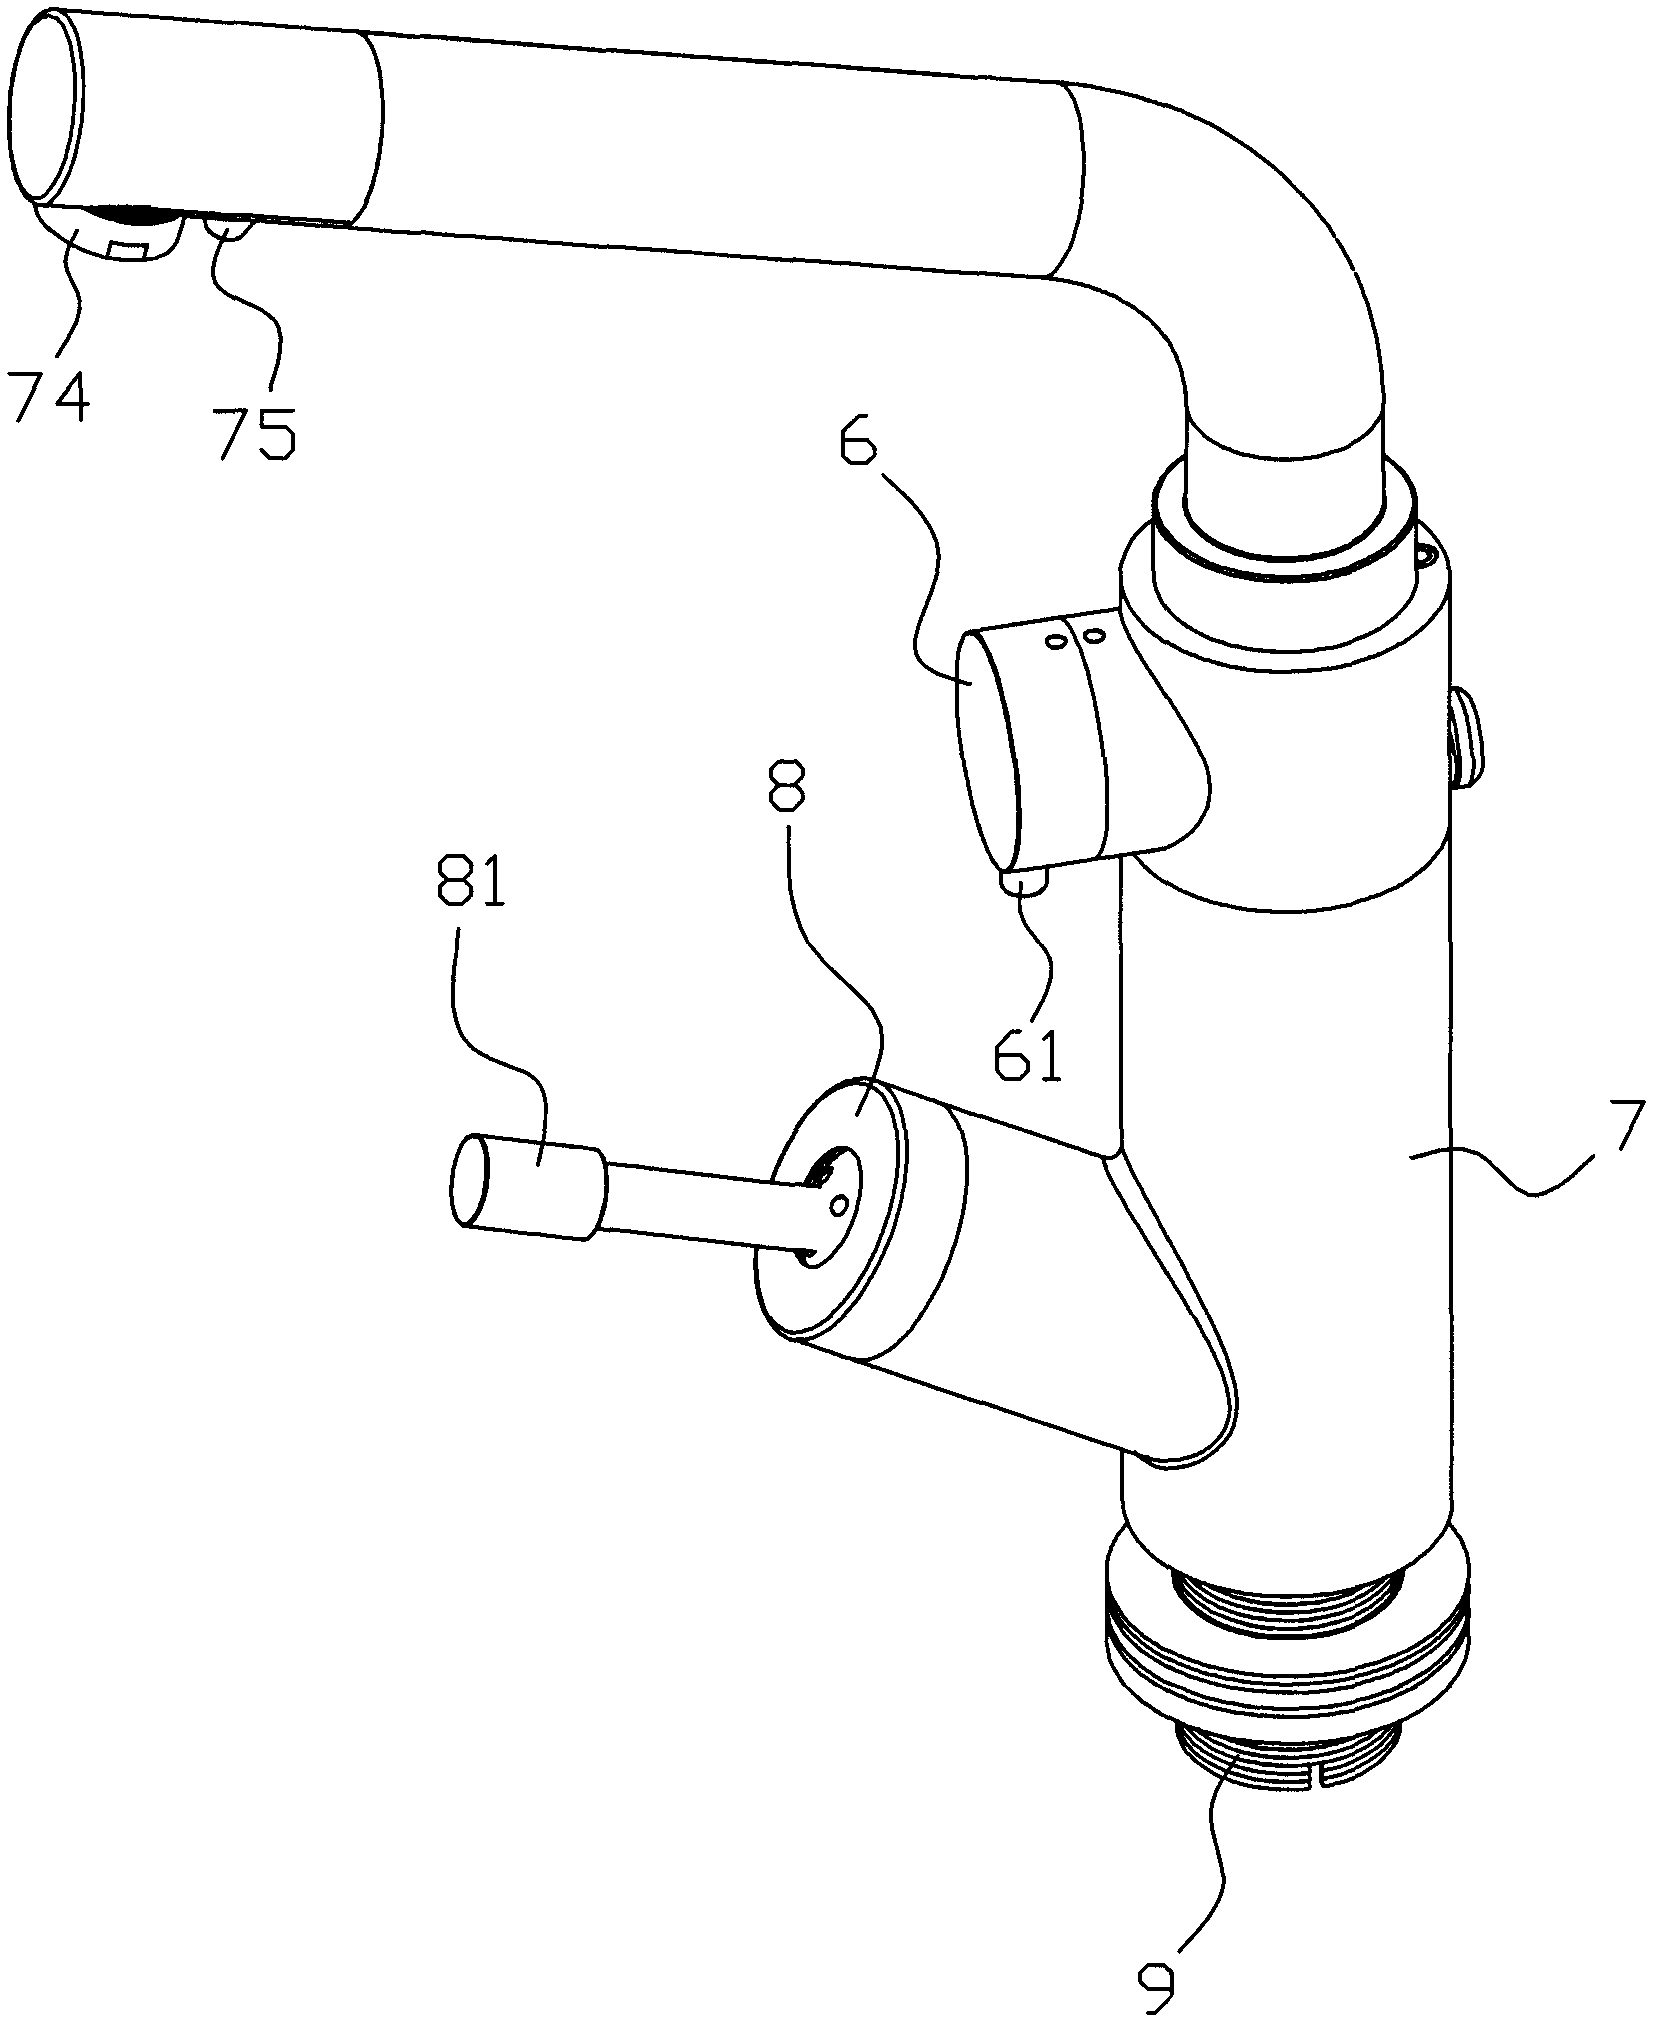 Two-purpose faucet for washing and drinking